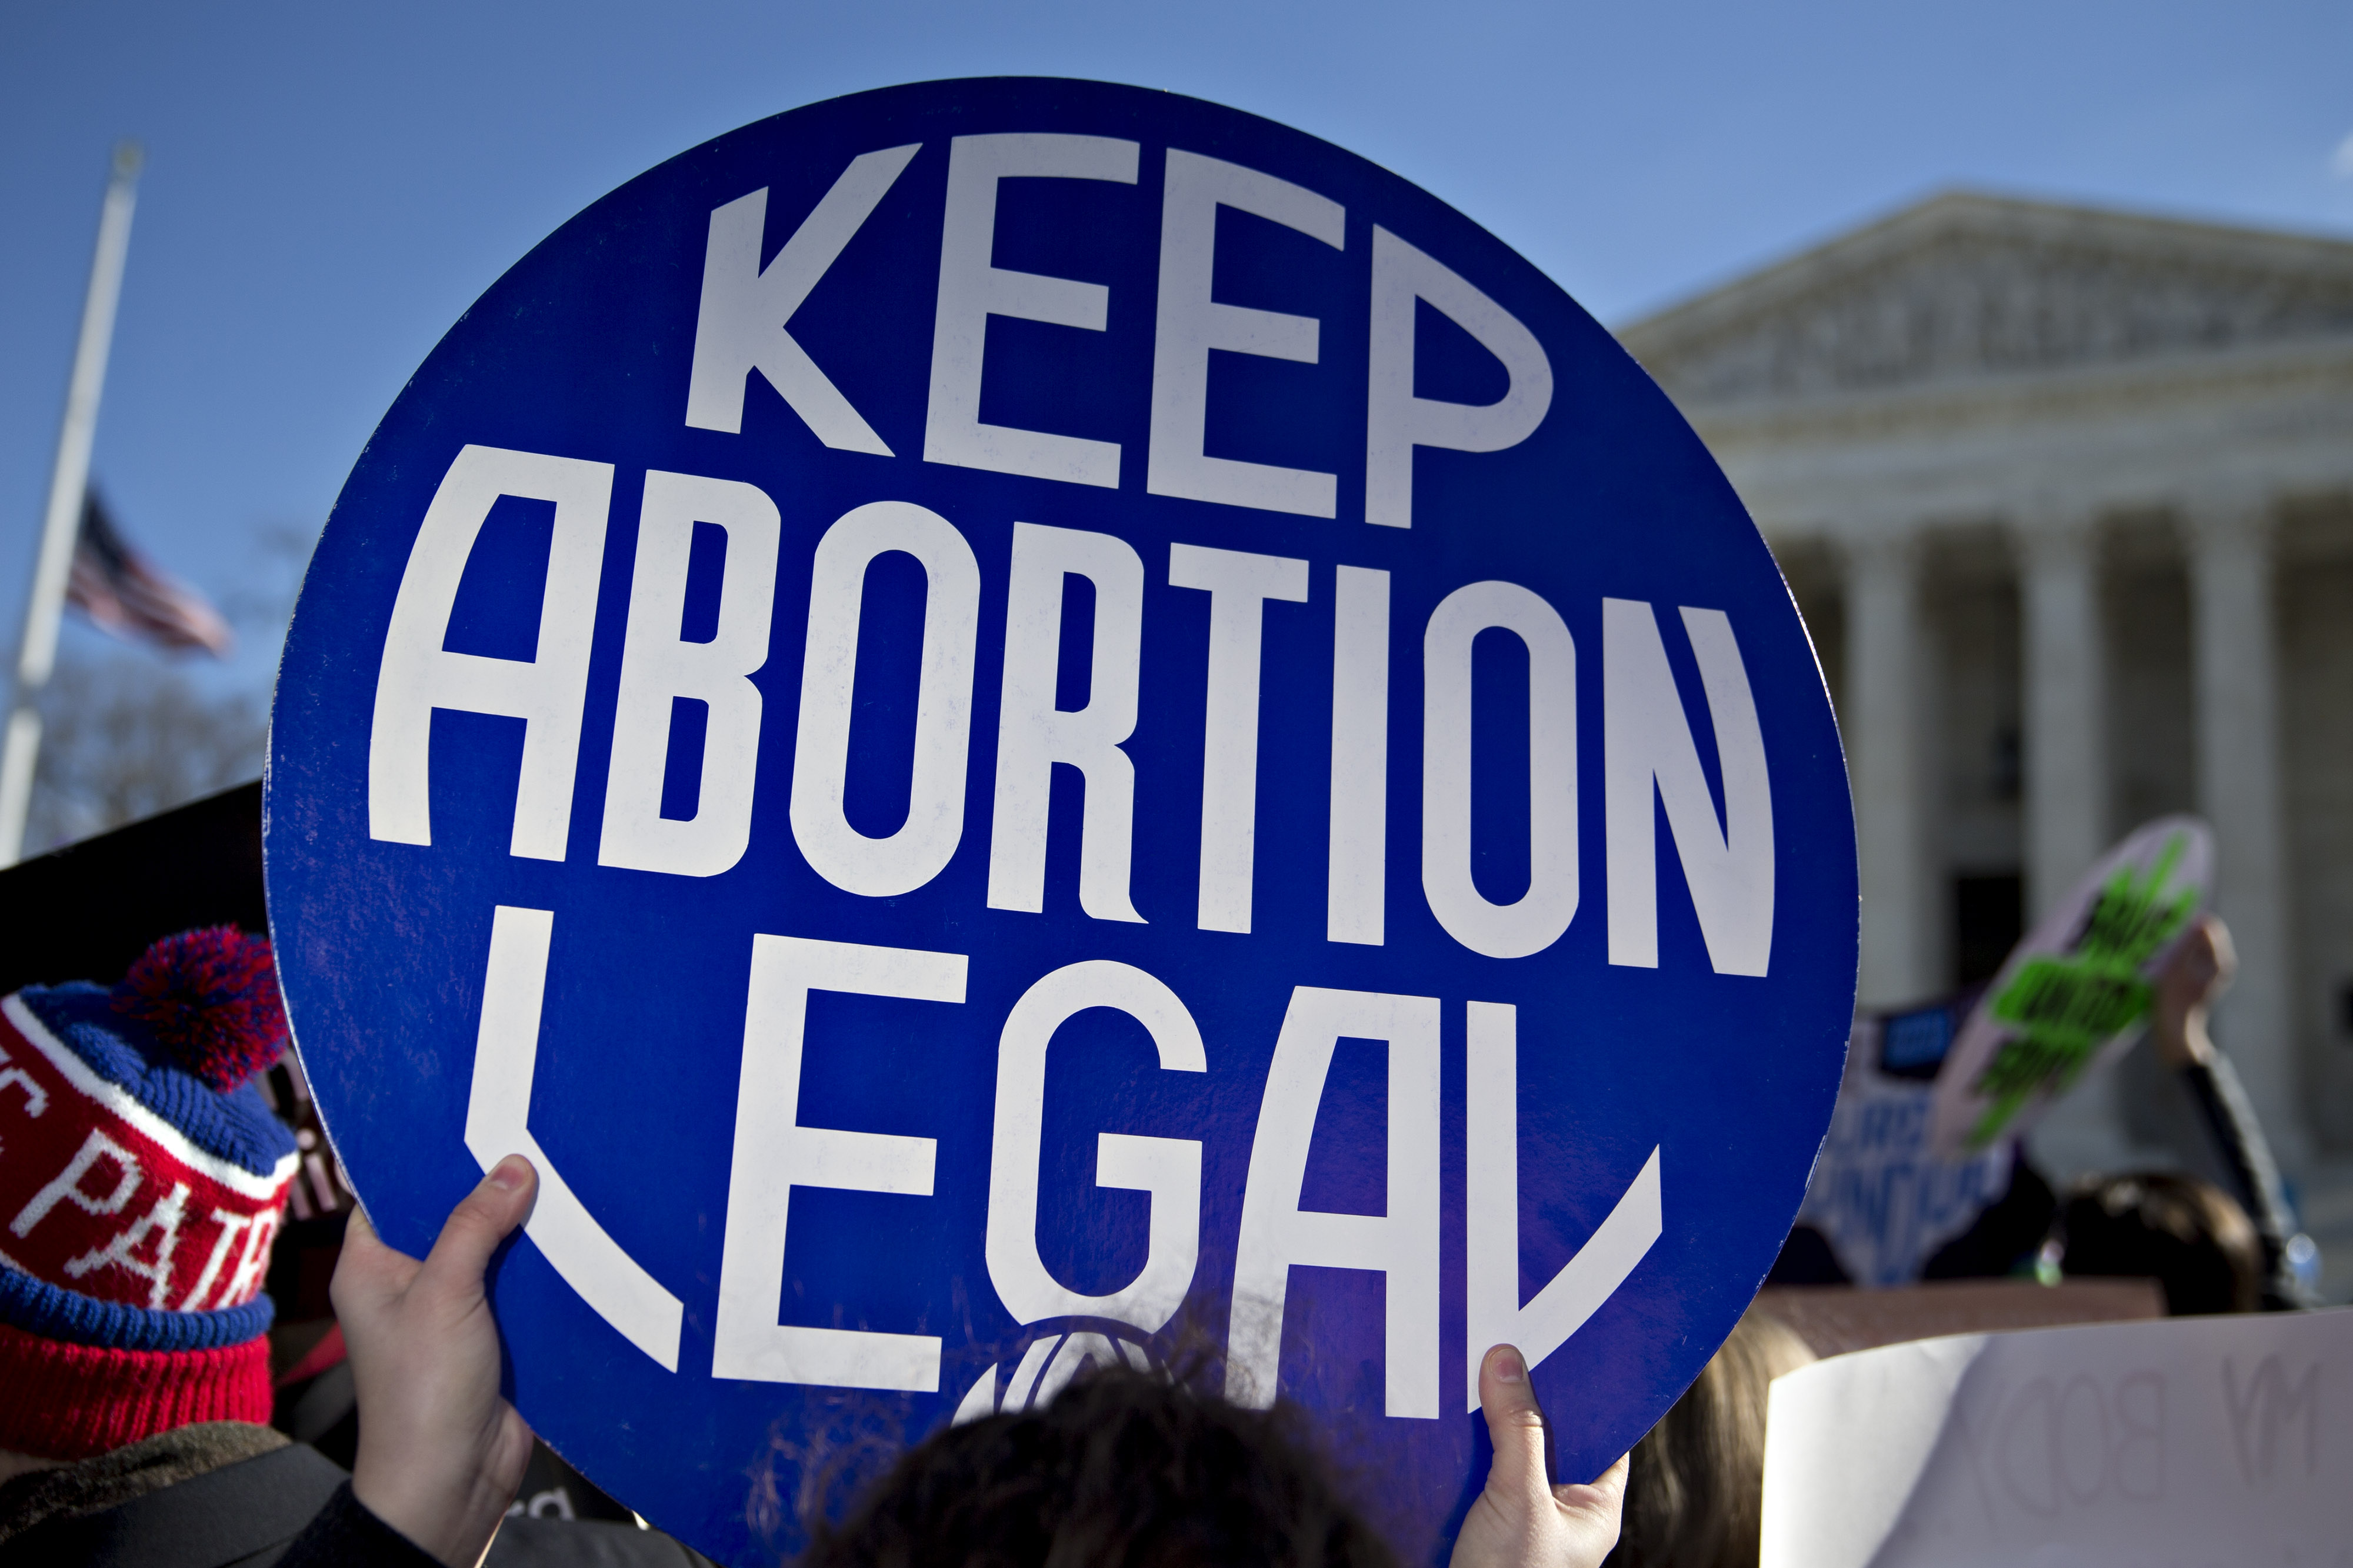 A demonstrator holds up a sign in support of abortion rights outside the U.S. Supreme Court in Washington, D.C., U.S., on Wednesday, March 2, 2016. Supreme Court justices clashed in their first abortion showdown in almost a decade as a pivotal justice suggested the court could stop short of a definitive ruling on a disputed Texas law regulating clinics. Photographer: Andrew Harrer/Bloomberg via Getty Images (Bloomberg—Bloomberg via Getty Images)